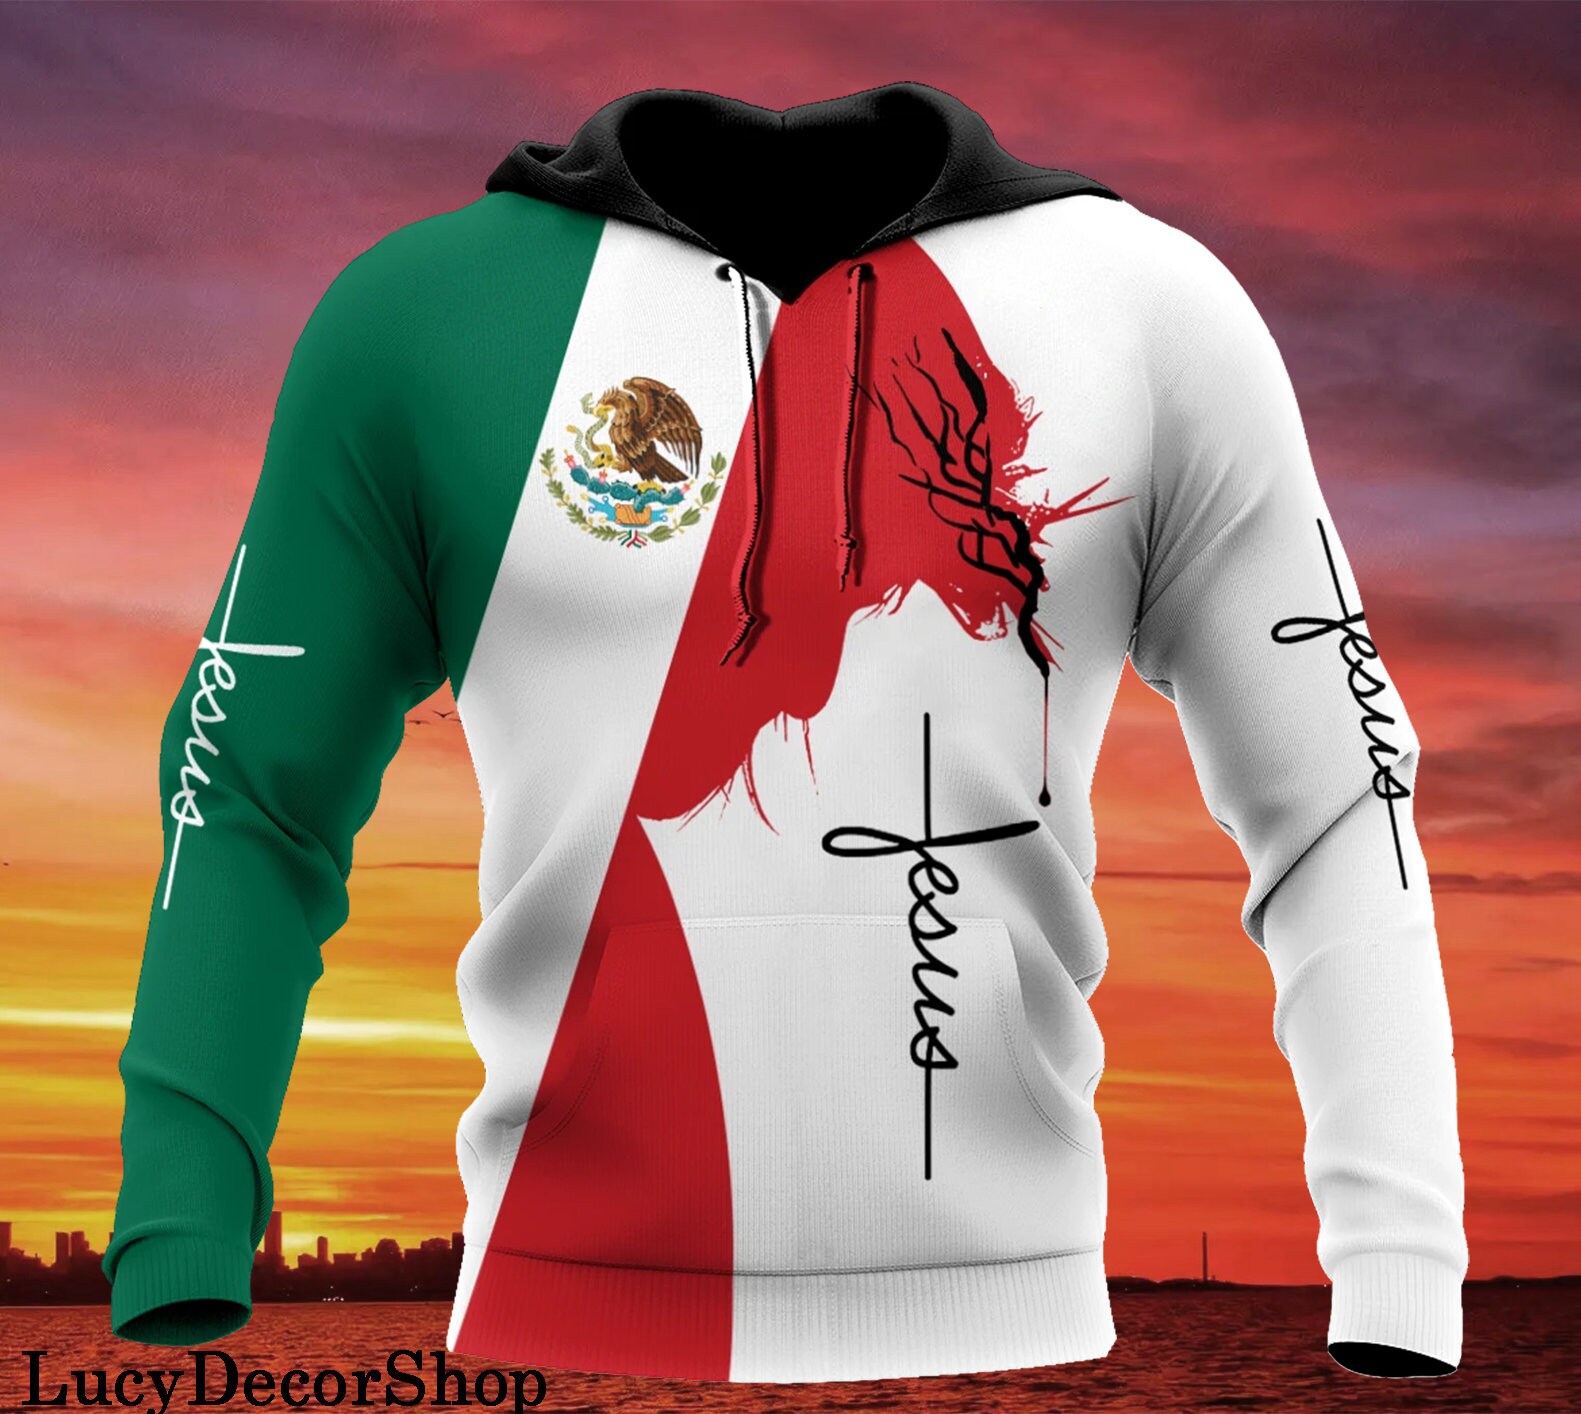 Mexico Christian Jesus All Over Printed Hoodie For Men And Women- Mexican Flag Design Pullover Zipped Jacket Unisex S-5XL